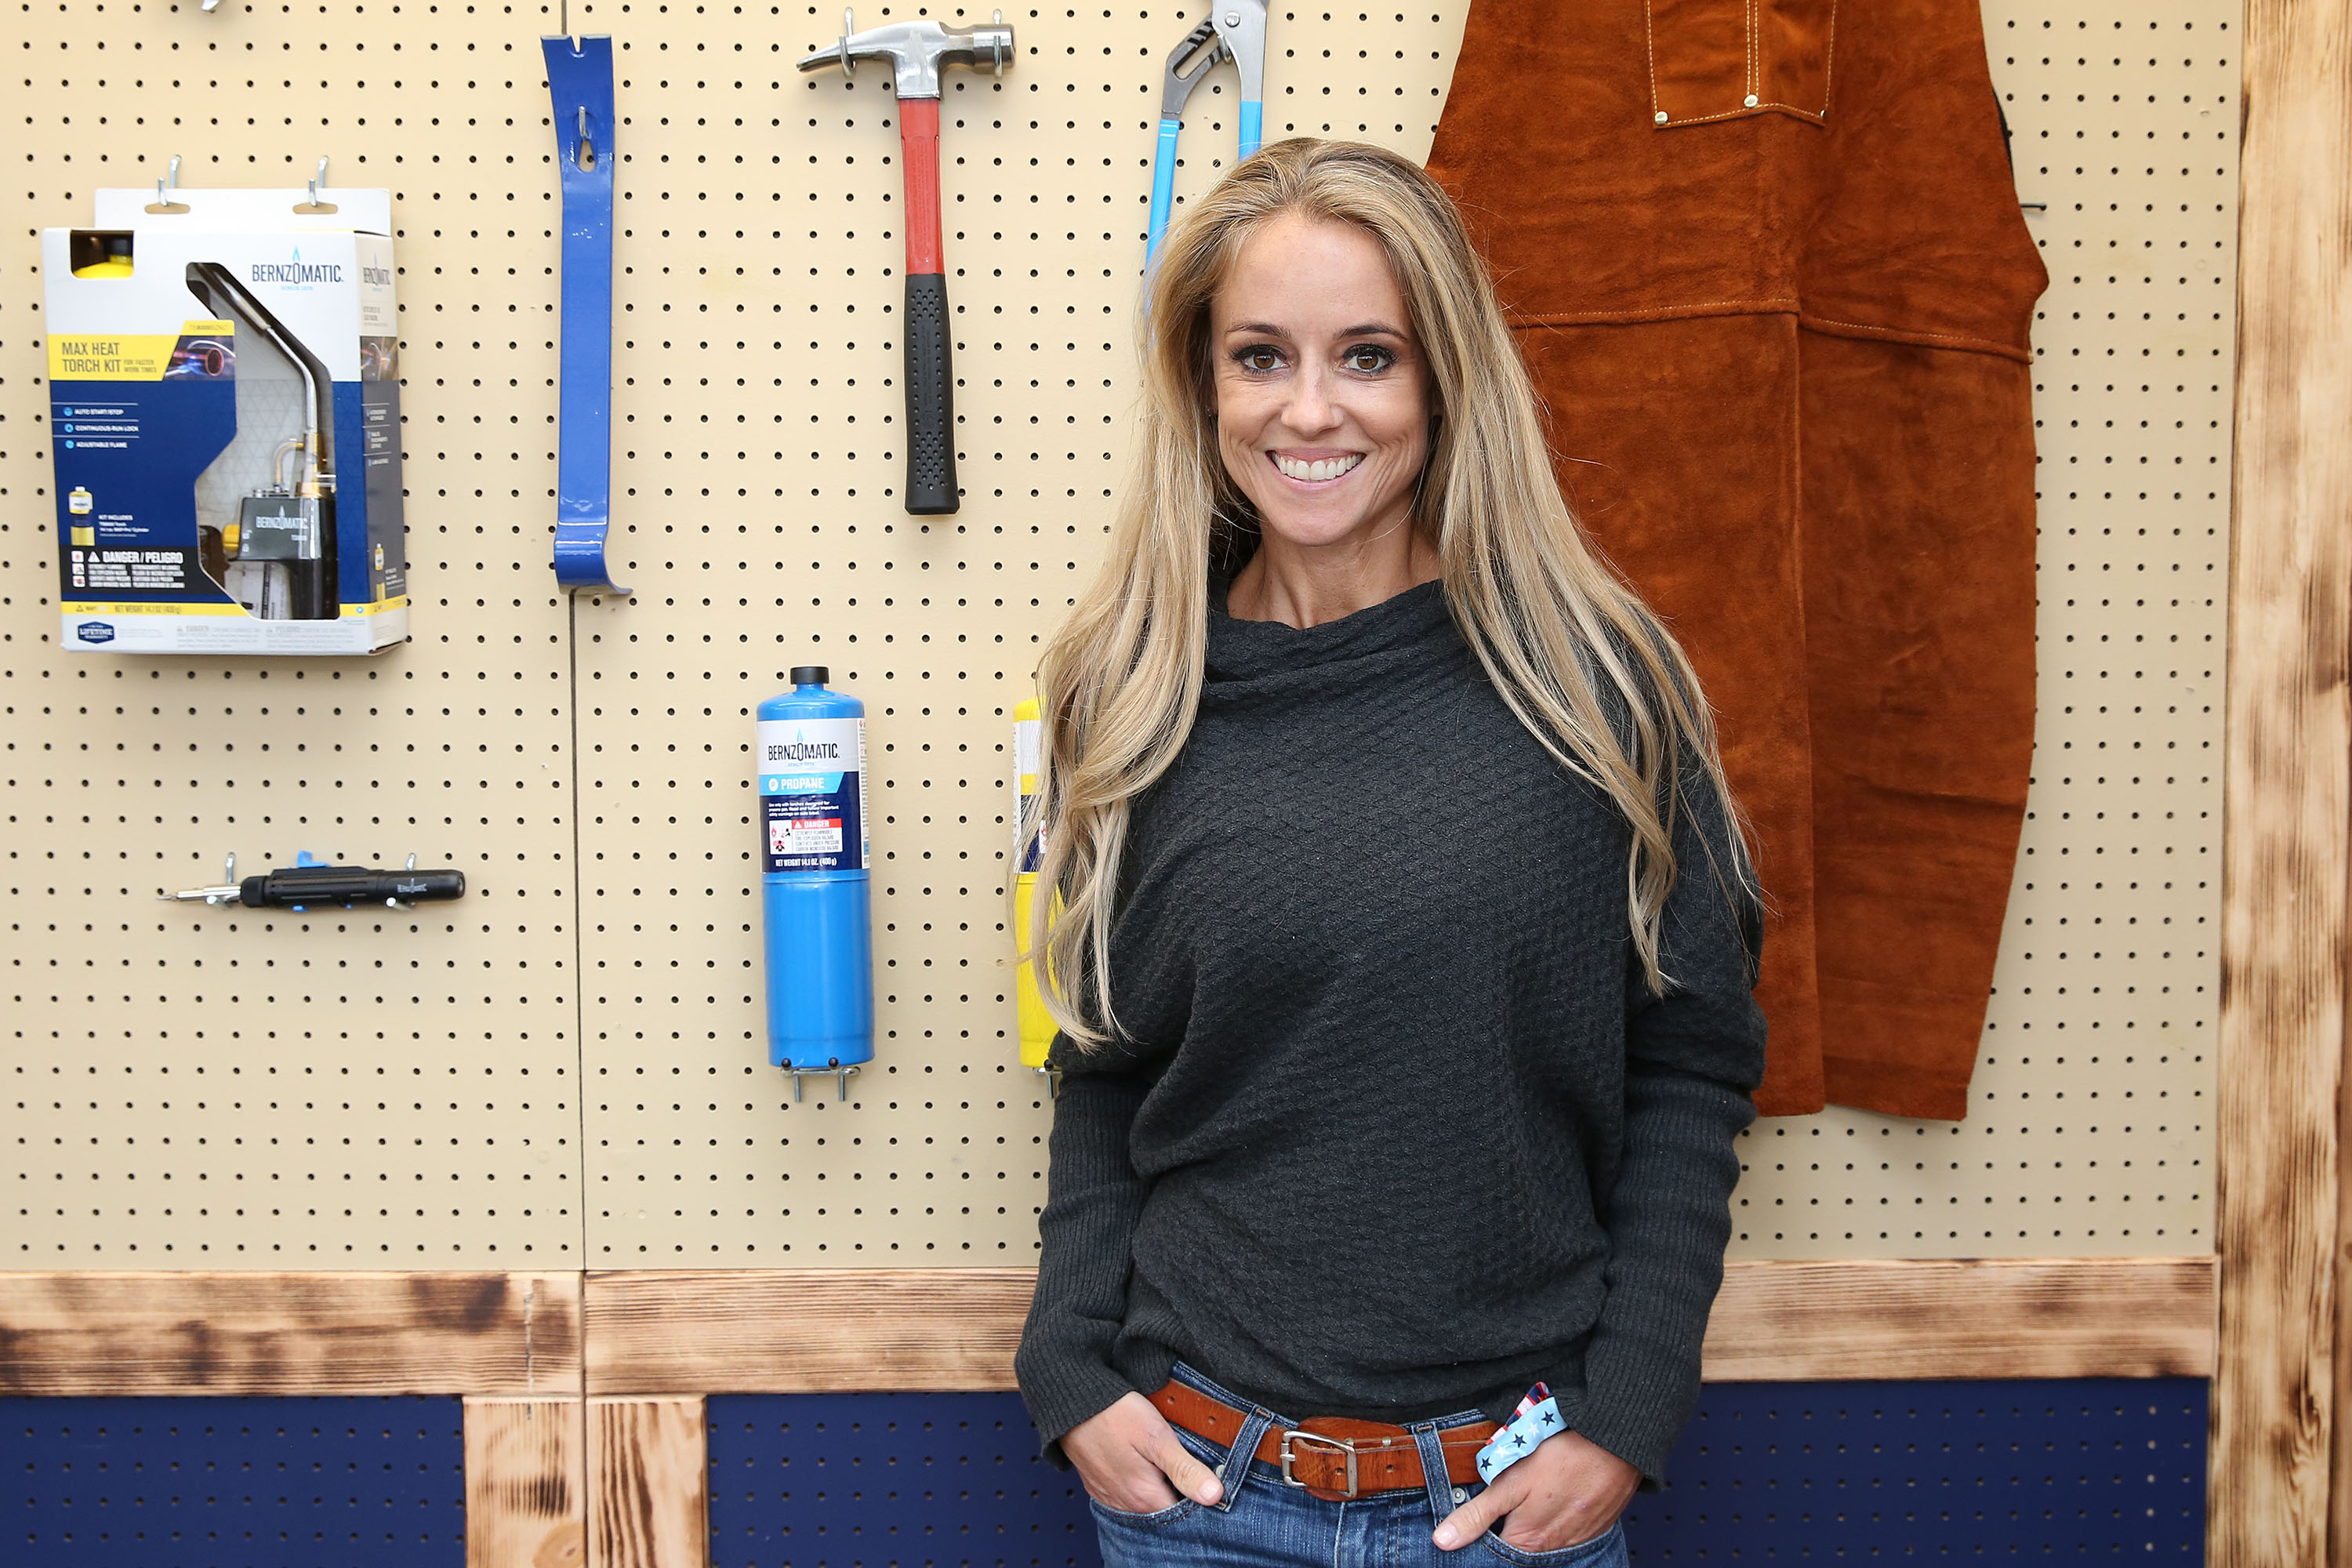 A woman in a black shirt and jeans stands in front of a wall of hanging carpentry tools.